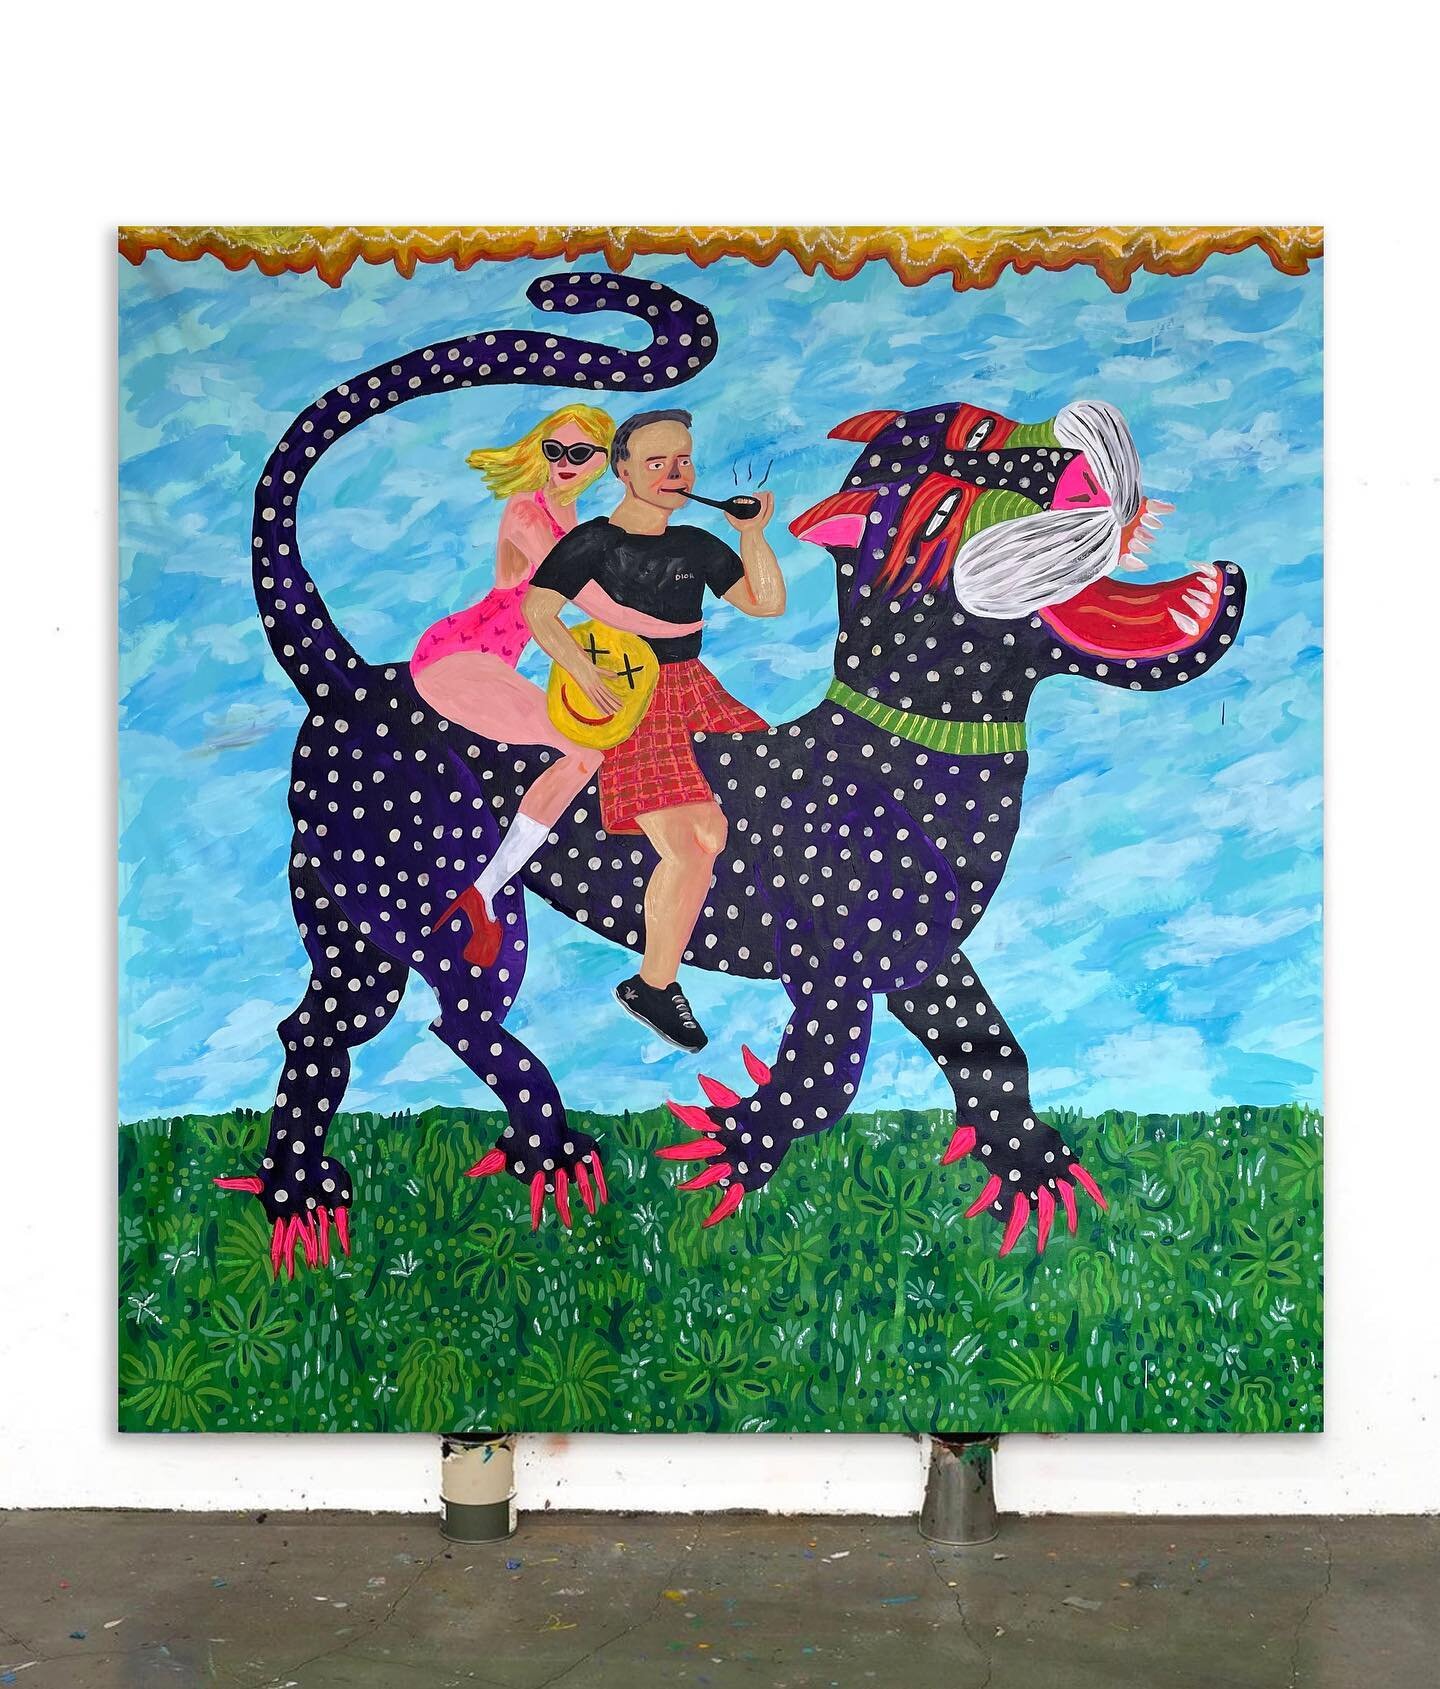 &ldquo;Collector on the tiger&rdquo; 145x145cm